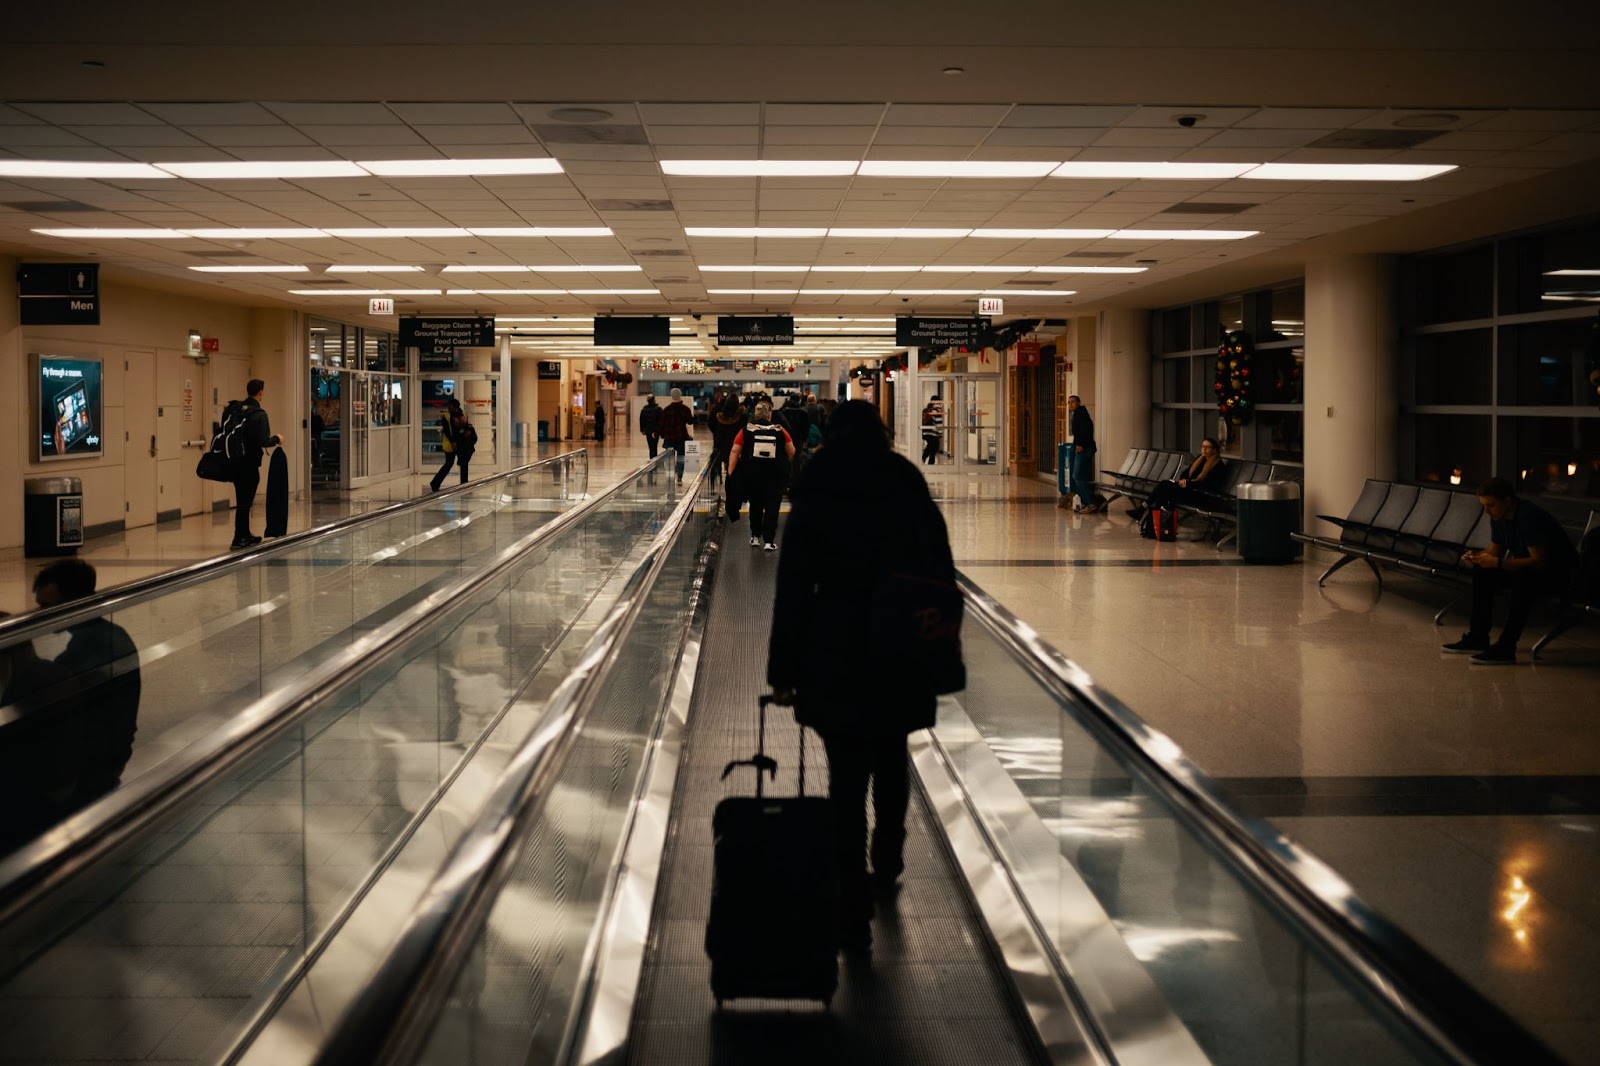 Bringing your own food and drinks can help save money at the airport.